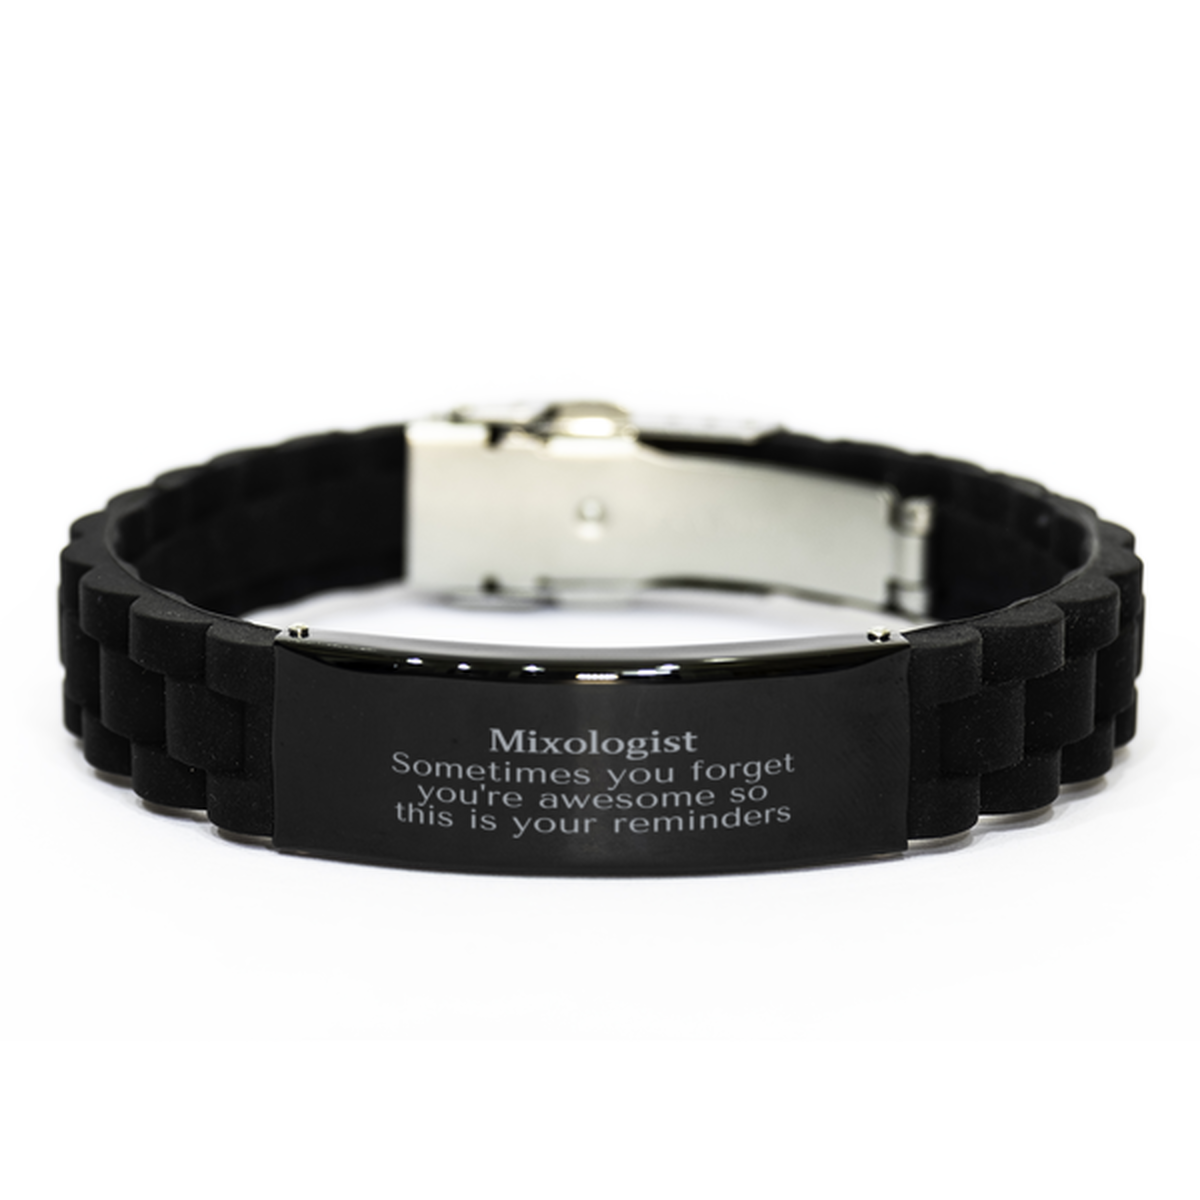 Sentimental Mixologist Black Glidelock Clasp Bracelet, Mixologist Sometimes you forget you're awesome so this is your reminders, Graduation Christmas Birthday Gifts for Mixologist, Men, Women, Coworkers